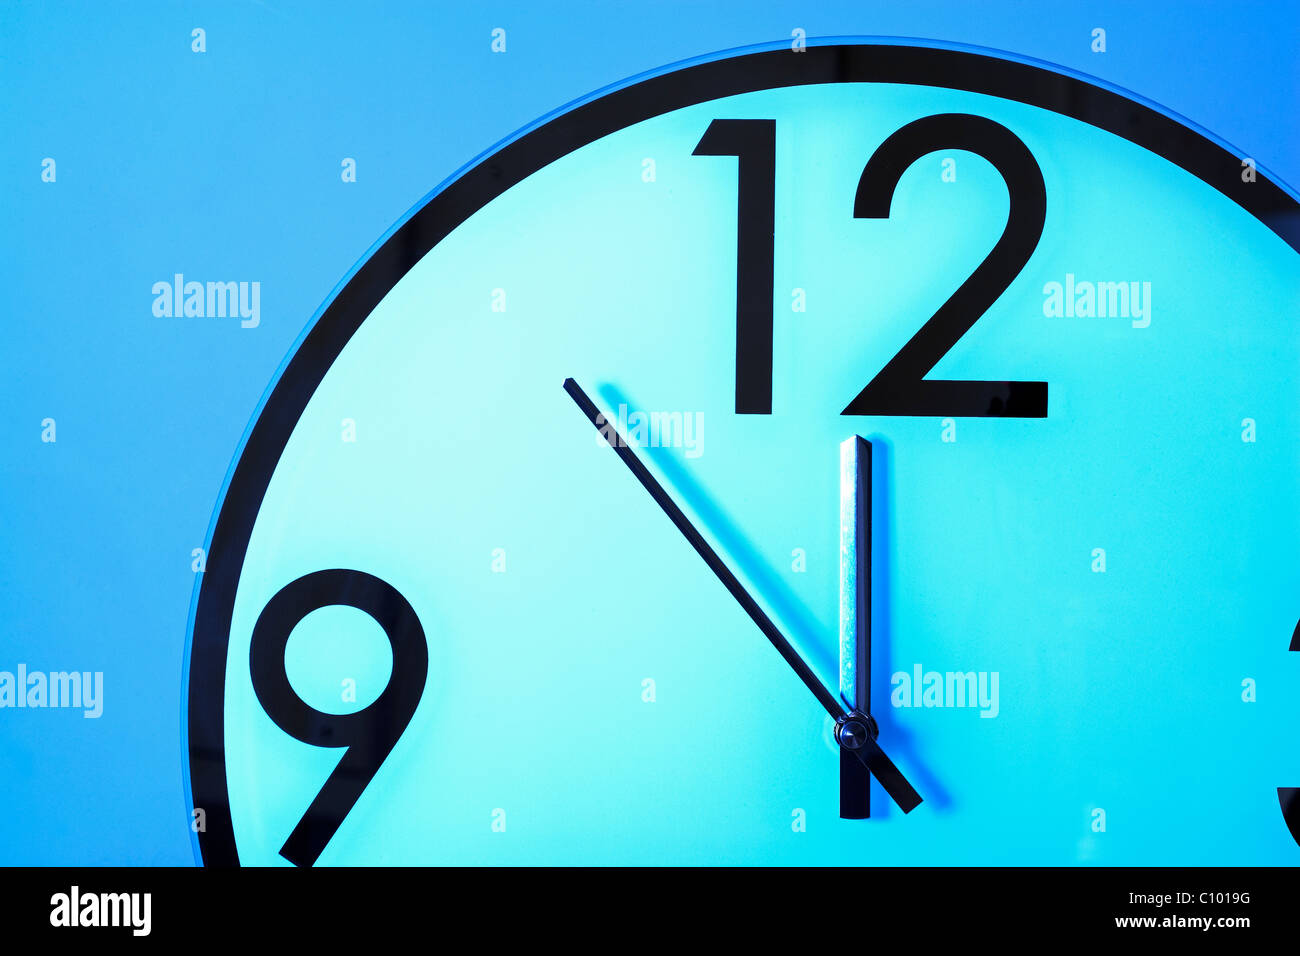 Clock face showing 5 minutes to 12 o'clock Stock Photo